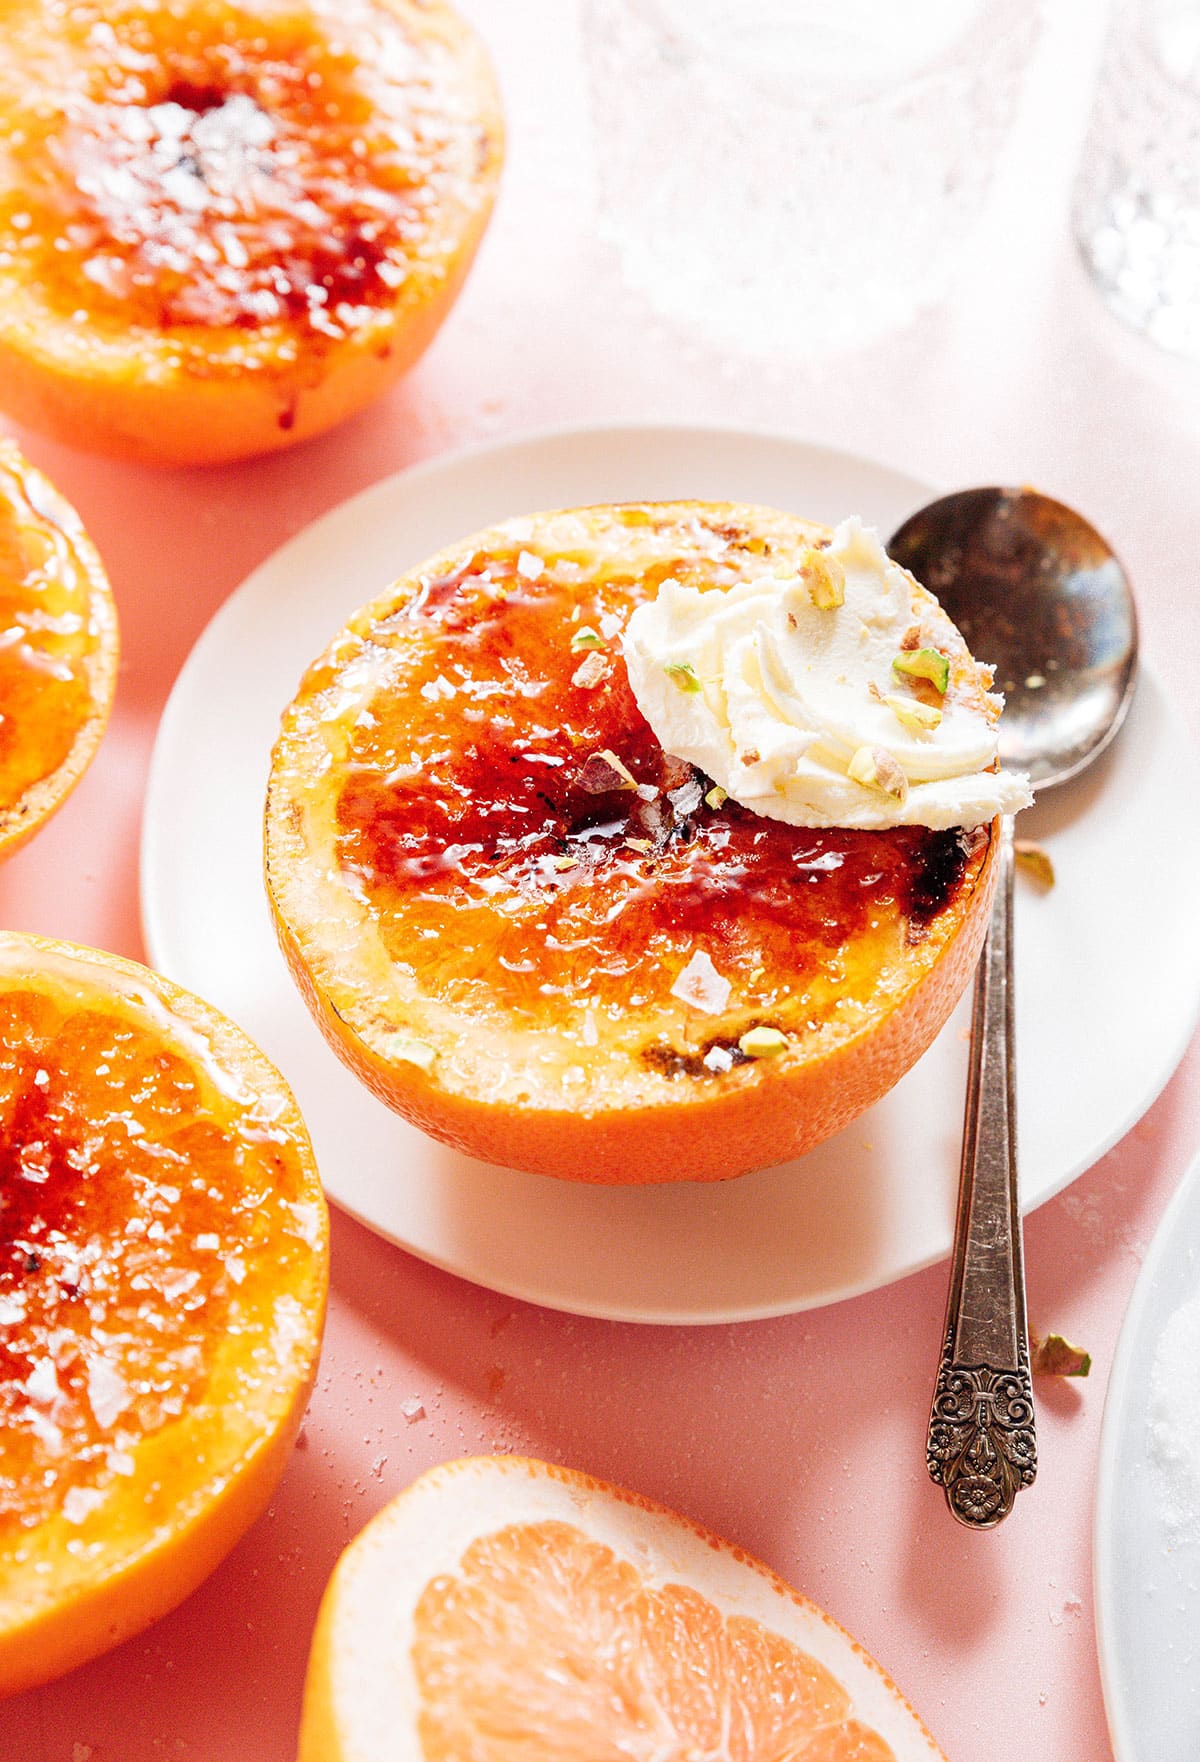 Grapefruit brulee on a plate with a spoon.